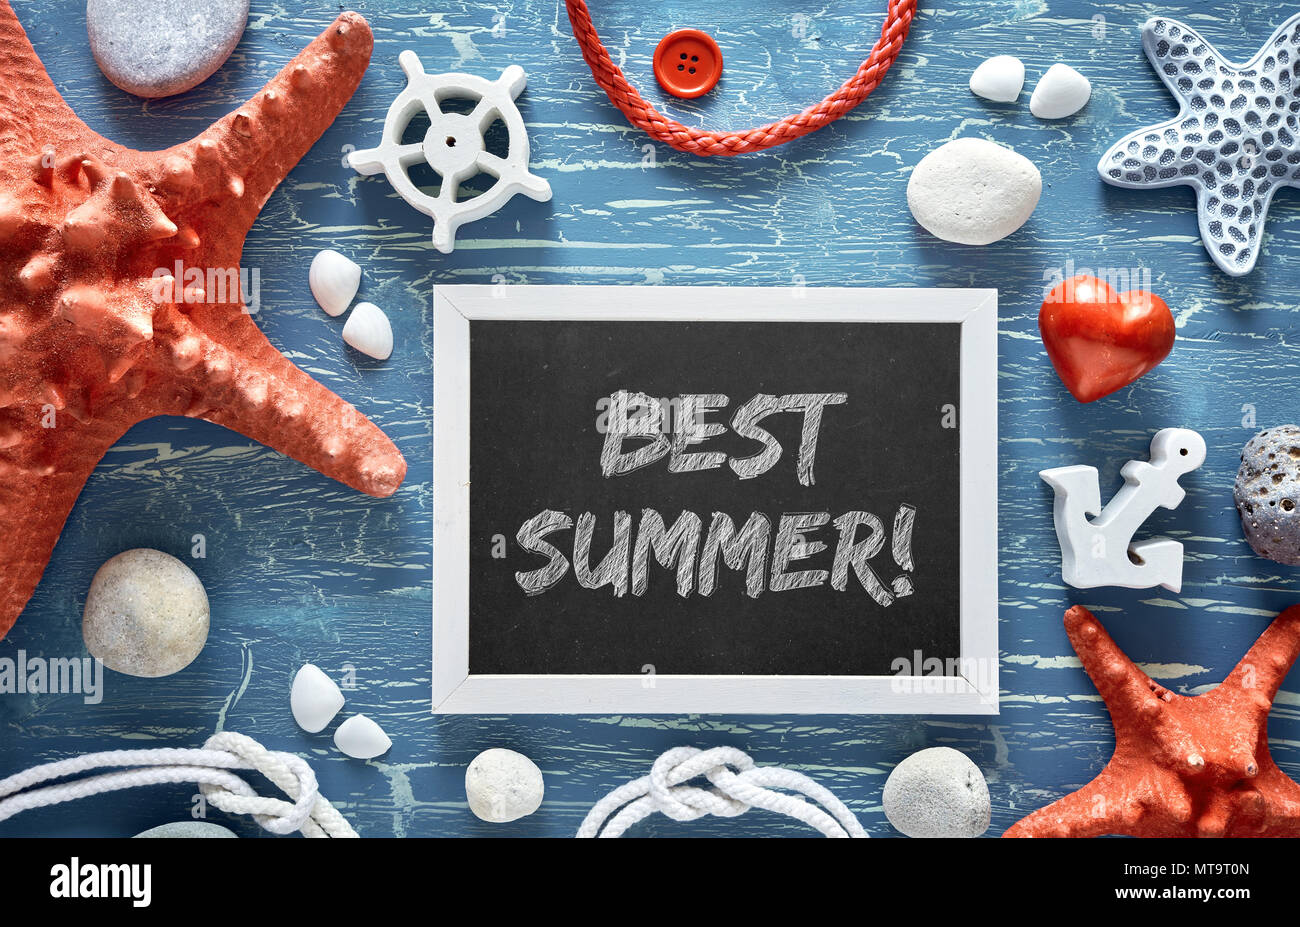 Blank blackboard with sea shells, stones, rope and star fish on blue wooden background, text 'Best Summer' Stock Photo